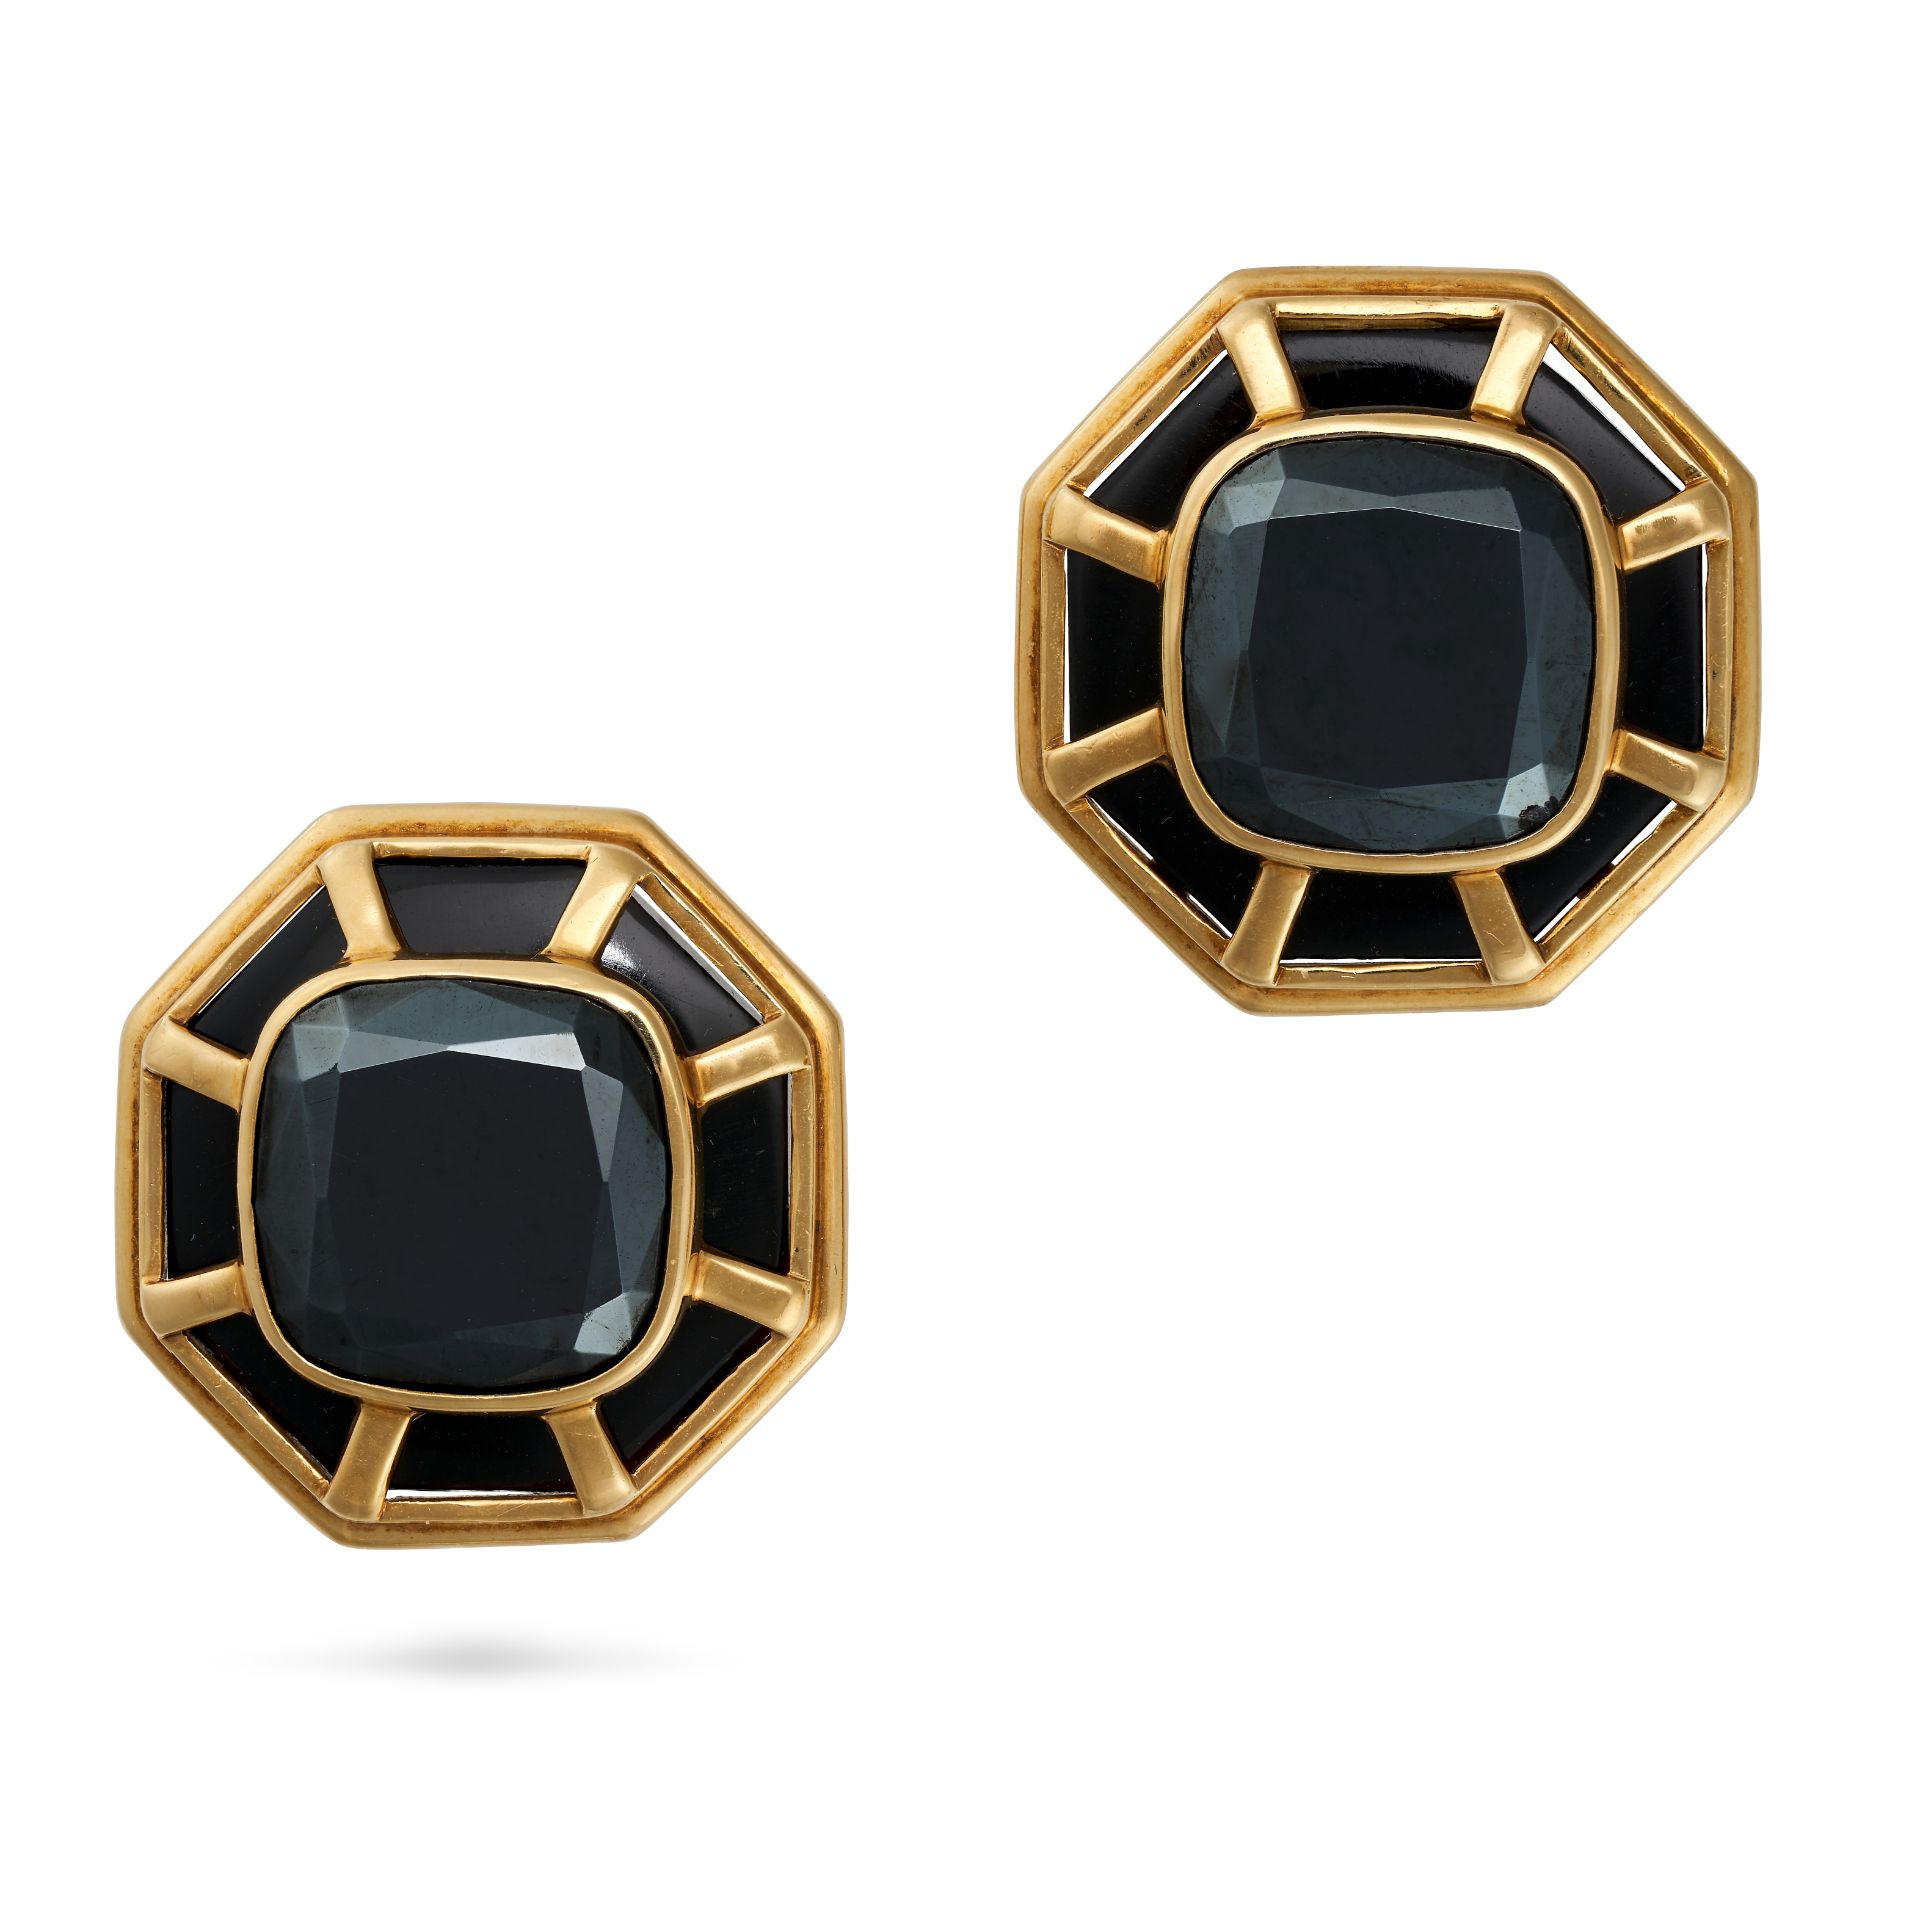 SUSAN BERMAN, A PAIR OF HEMATITE AND ONYX CLIP EARRINGS in 18ct yellow gold, each hexagonal face ...